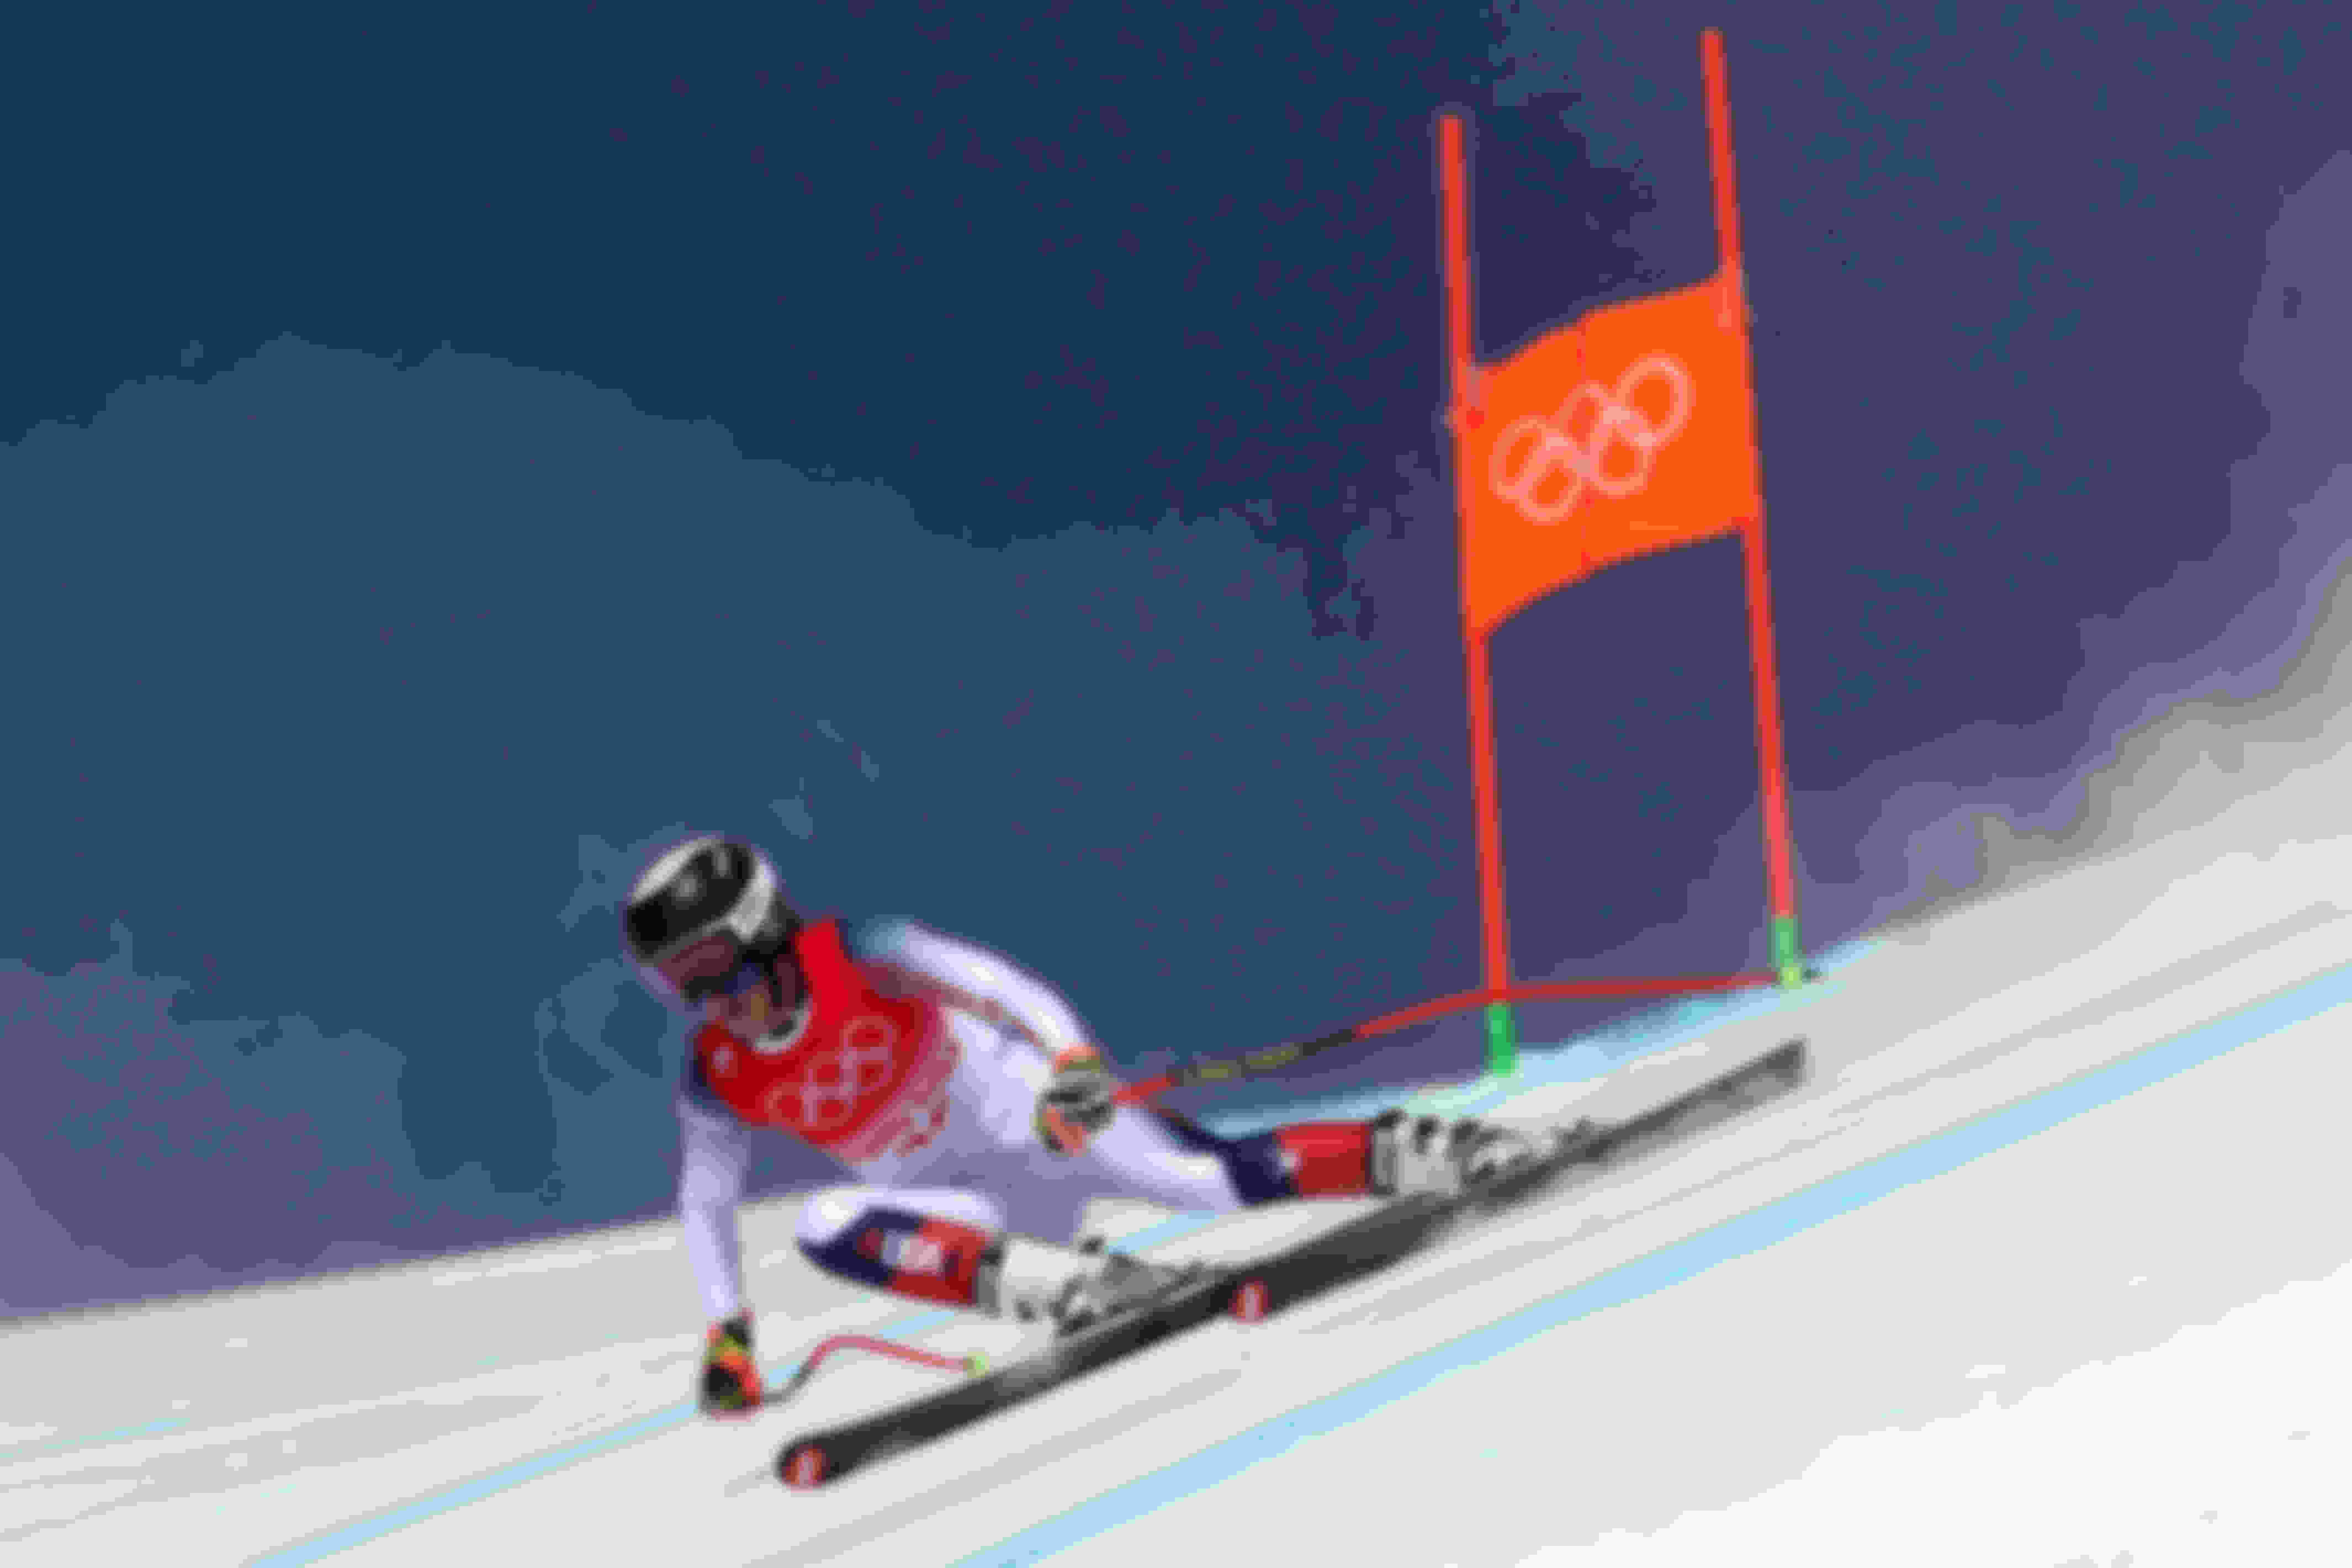 Keely Cashman of Team USA skis during the women's downhill